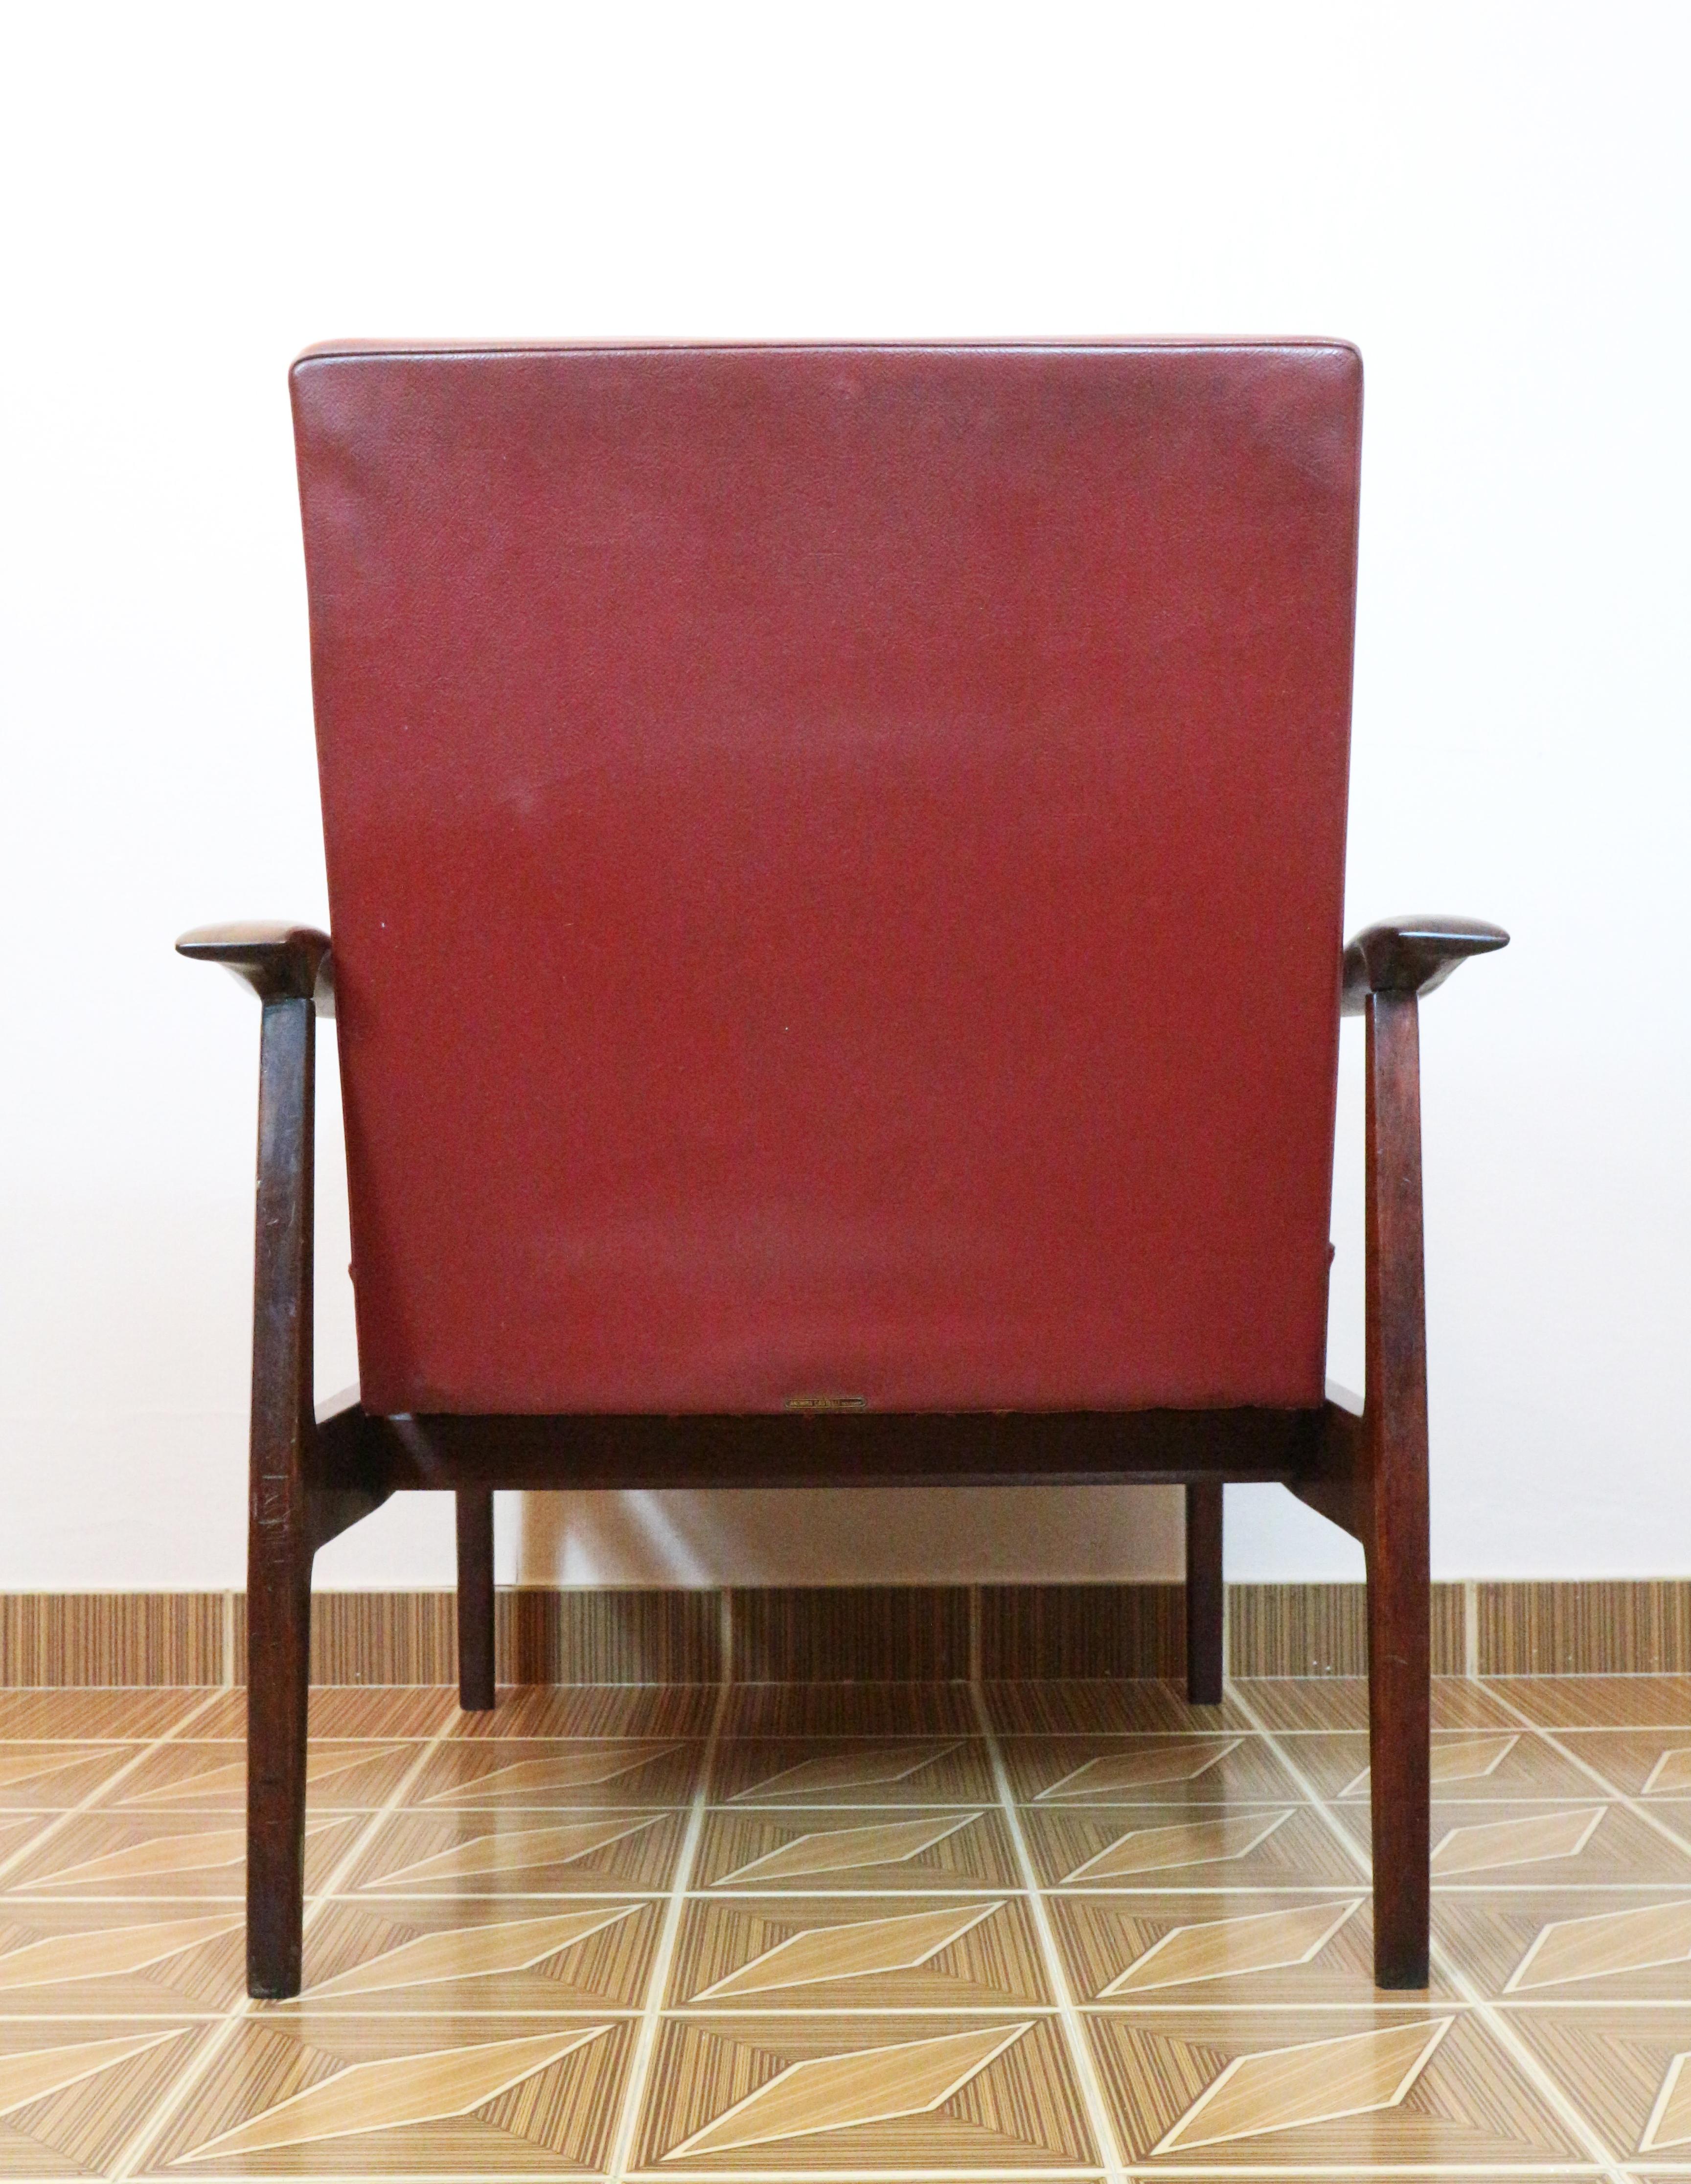 Pair of Italian Armchairs Produced by Anonima Castelli, 1960s im Zustand „Gut“ im Angebot in Carpi, Modena